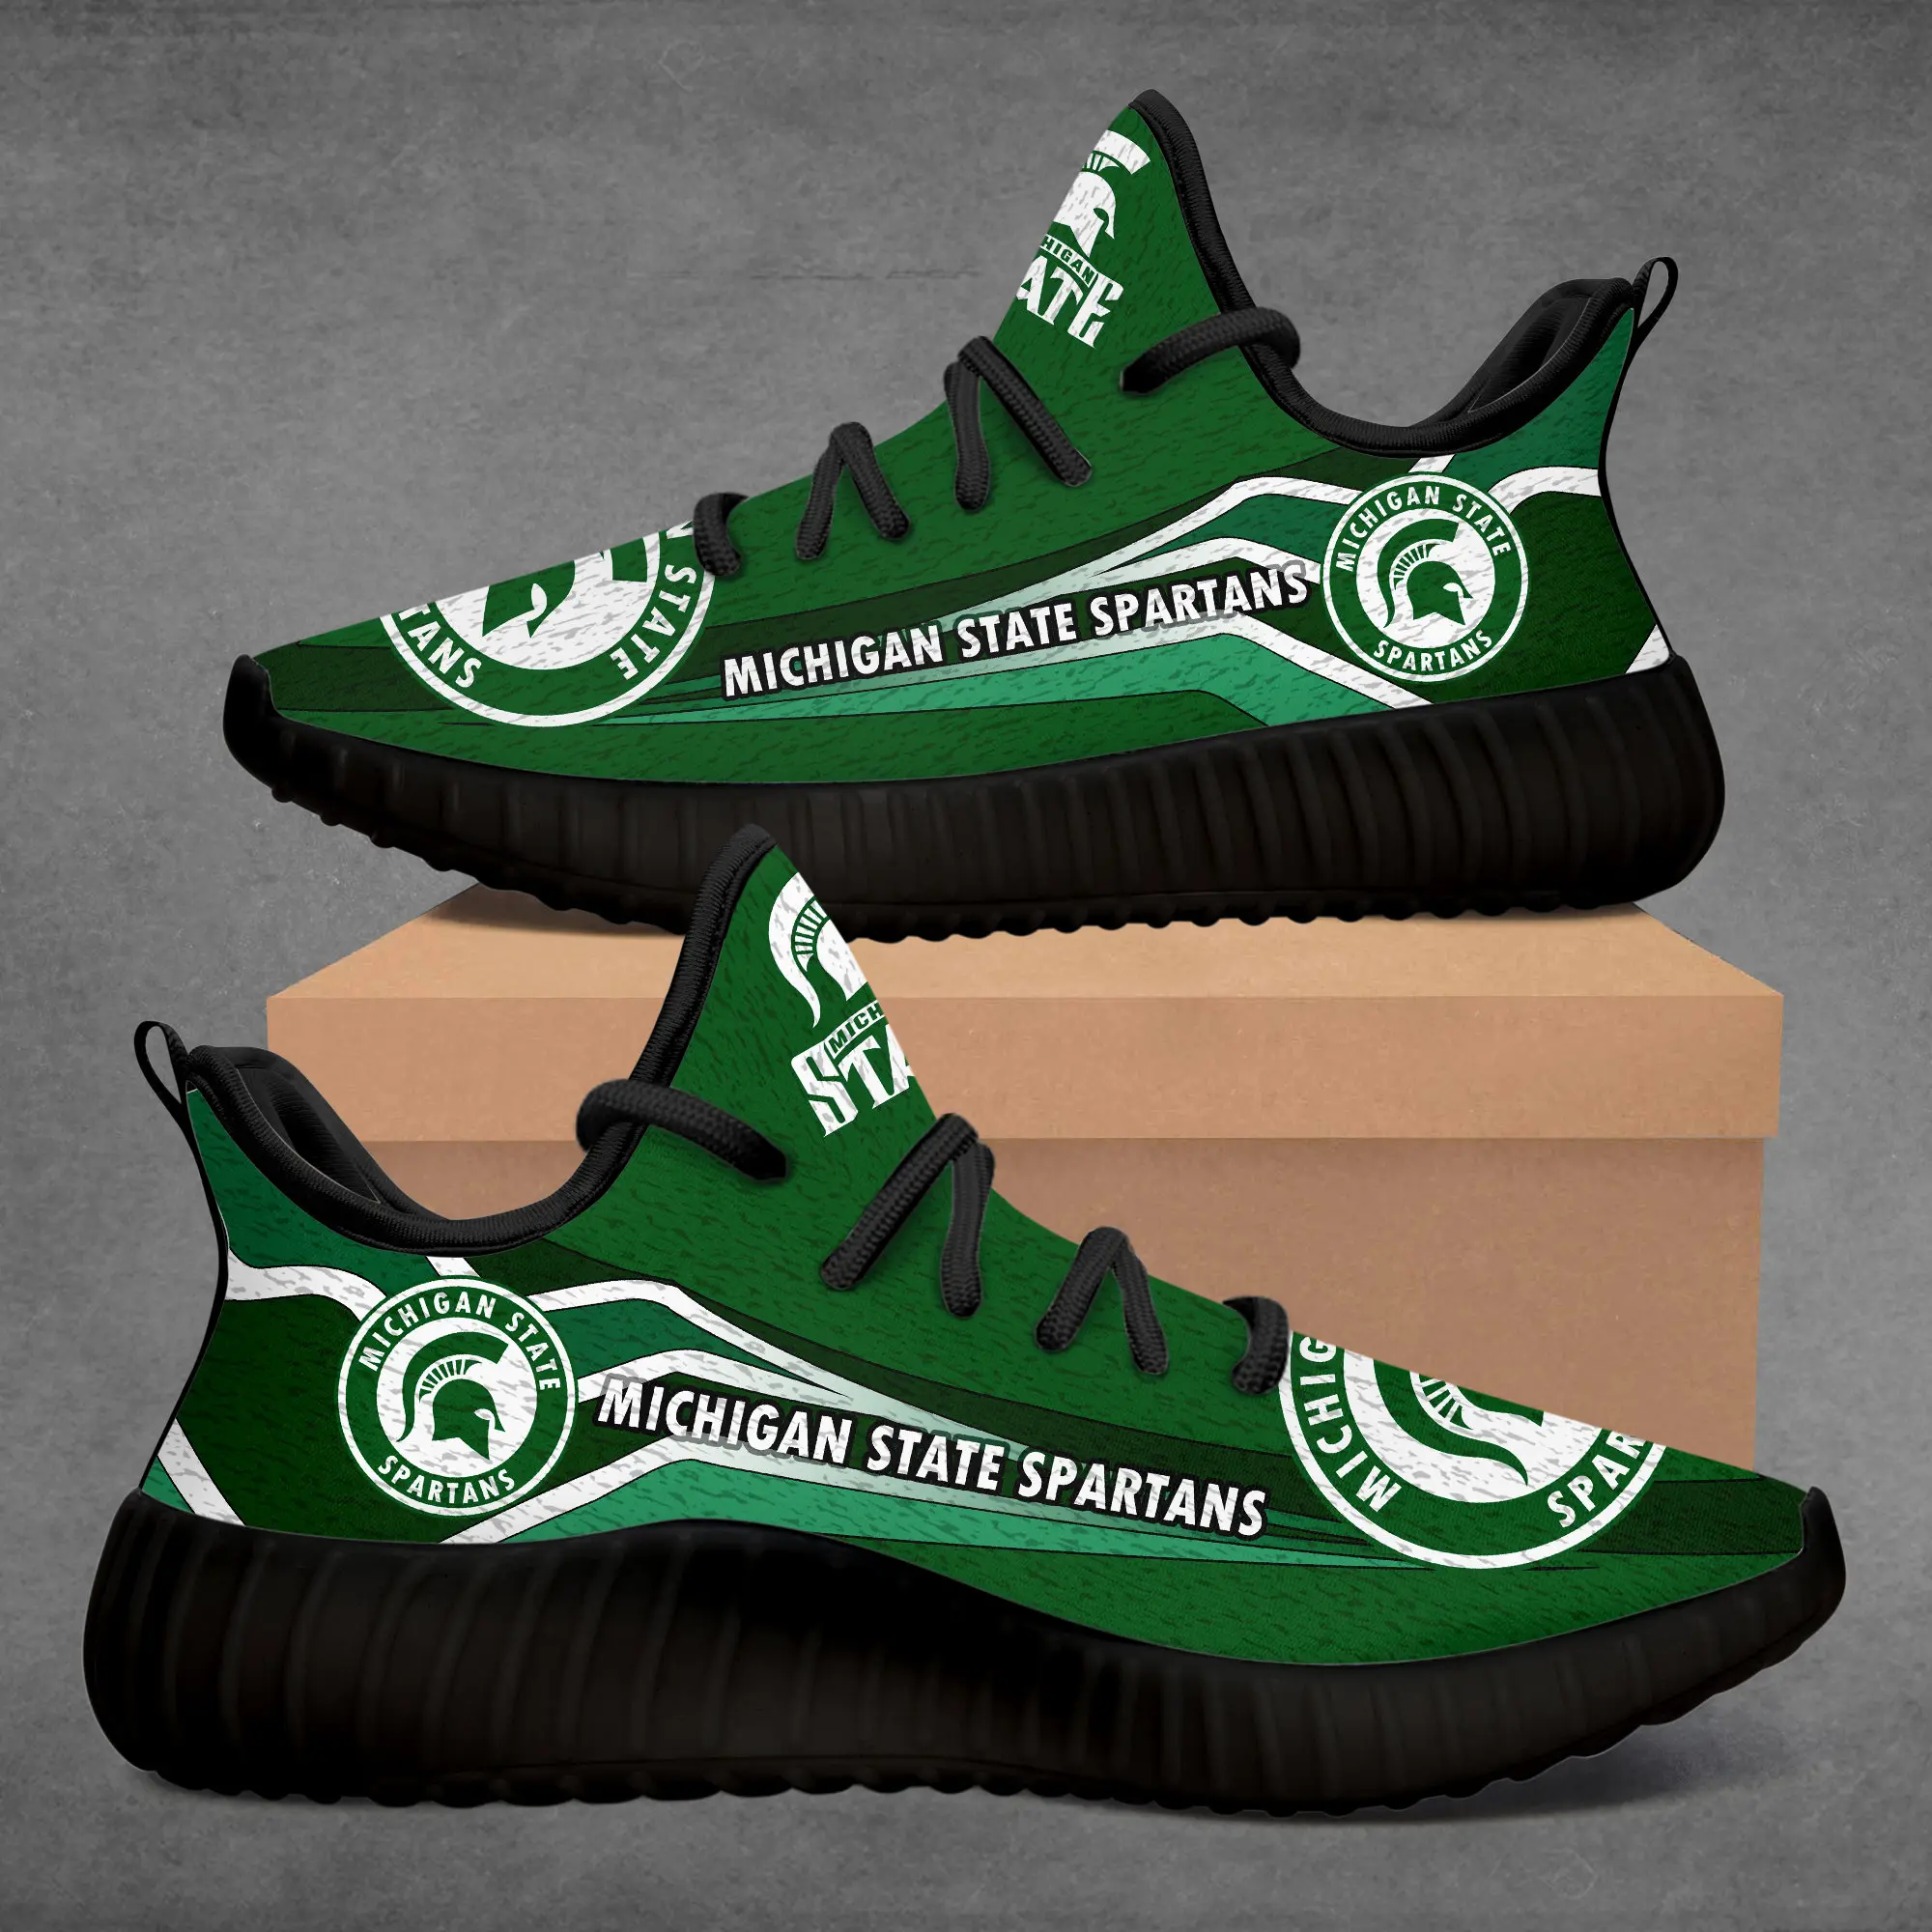 

Custom Sneaker MICHIGAN-STATE-SPARTANS Running Ocean Theme Shoes